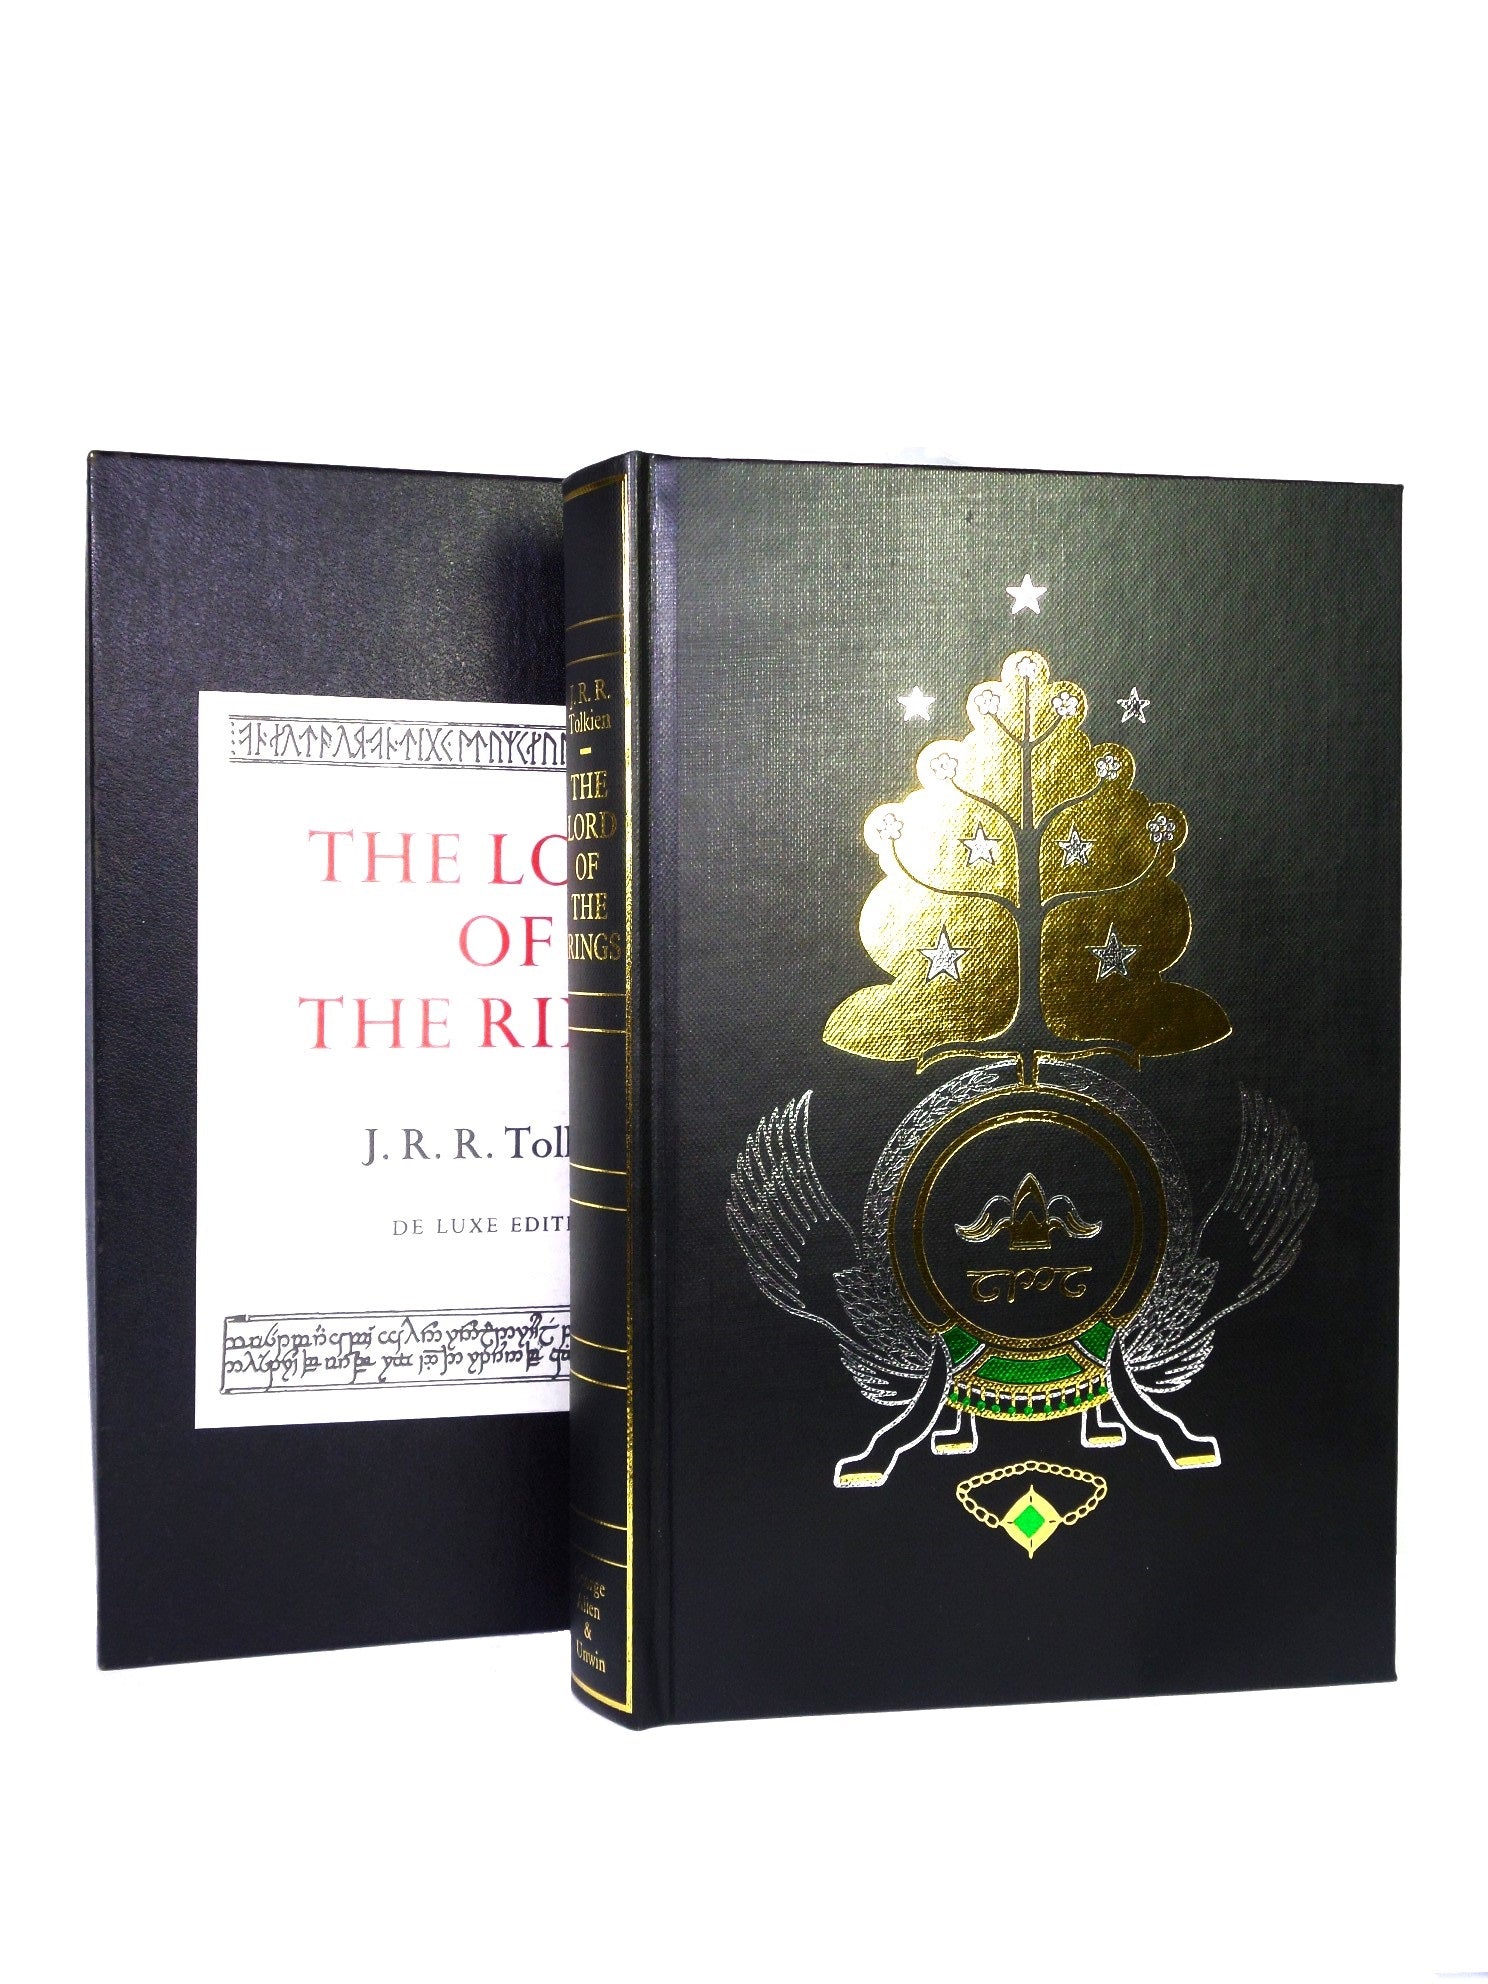 THE LORD OF THE RINGS TRILOGY BY J.R.R. TOLKIEN 1984 FINE DELUXE EDITION